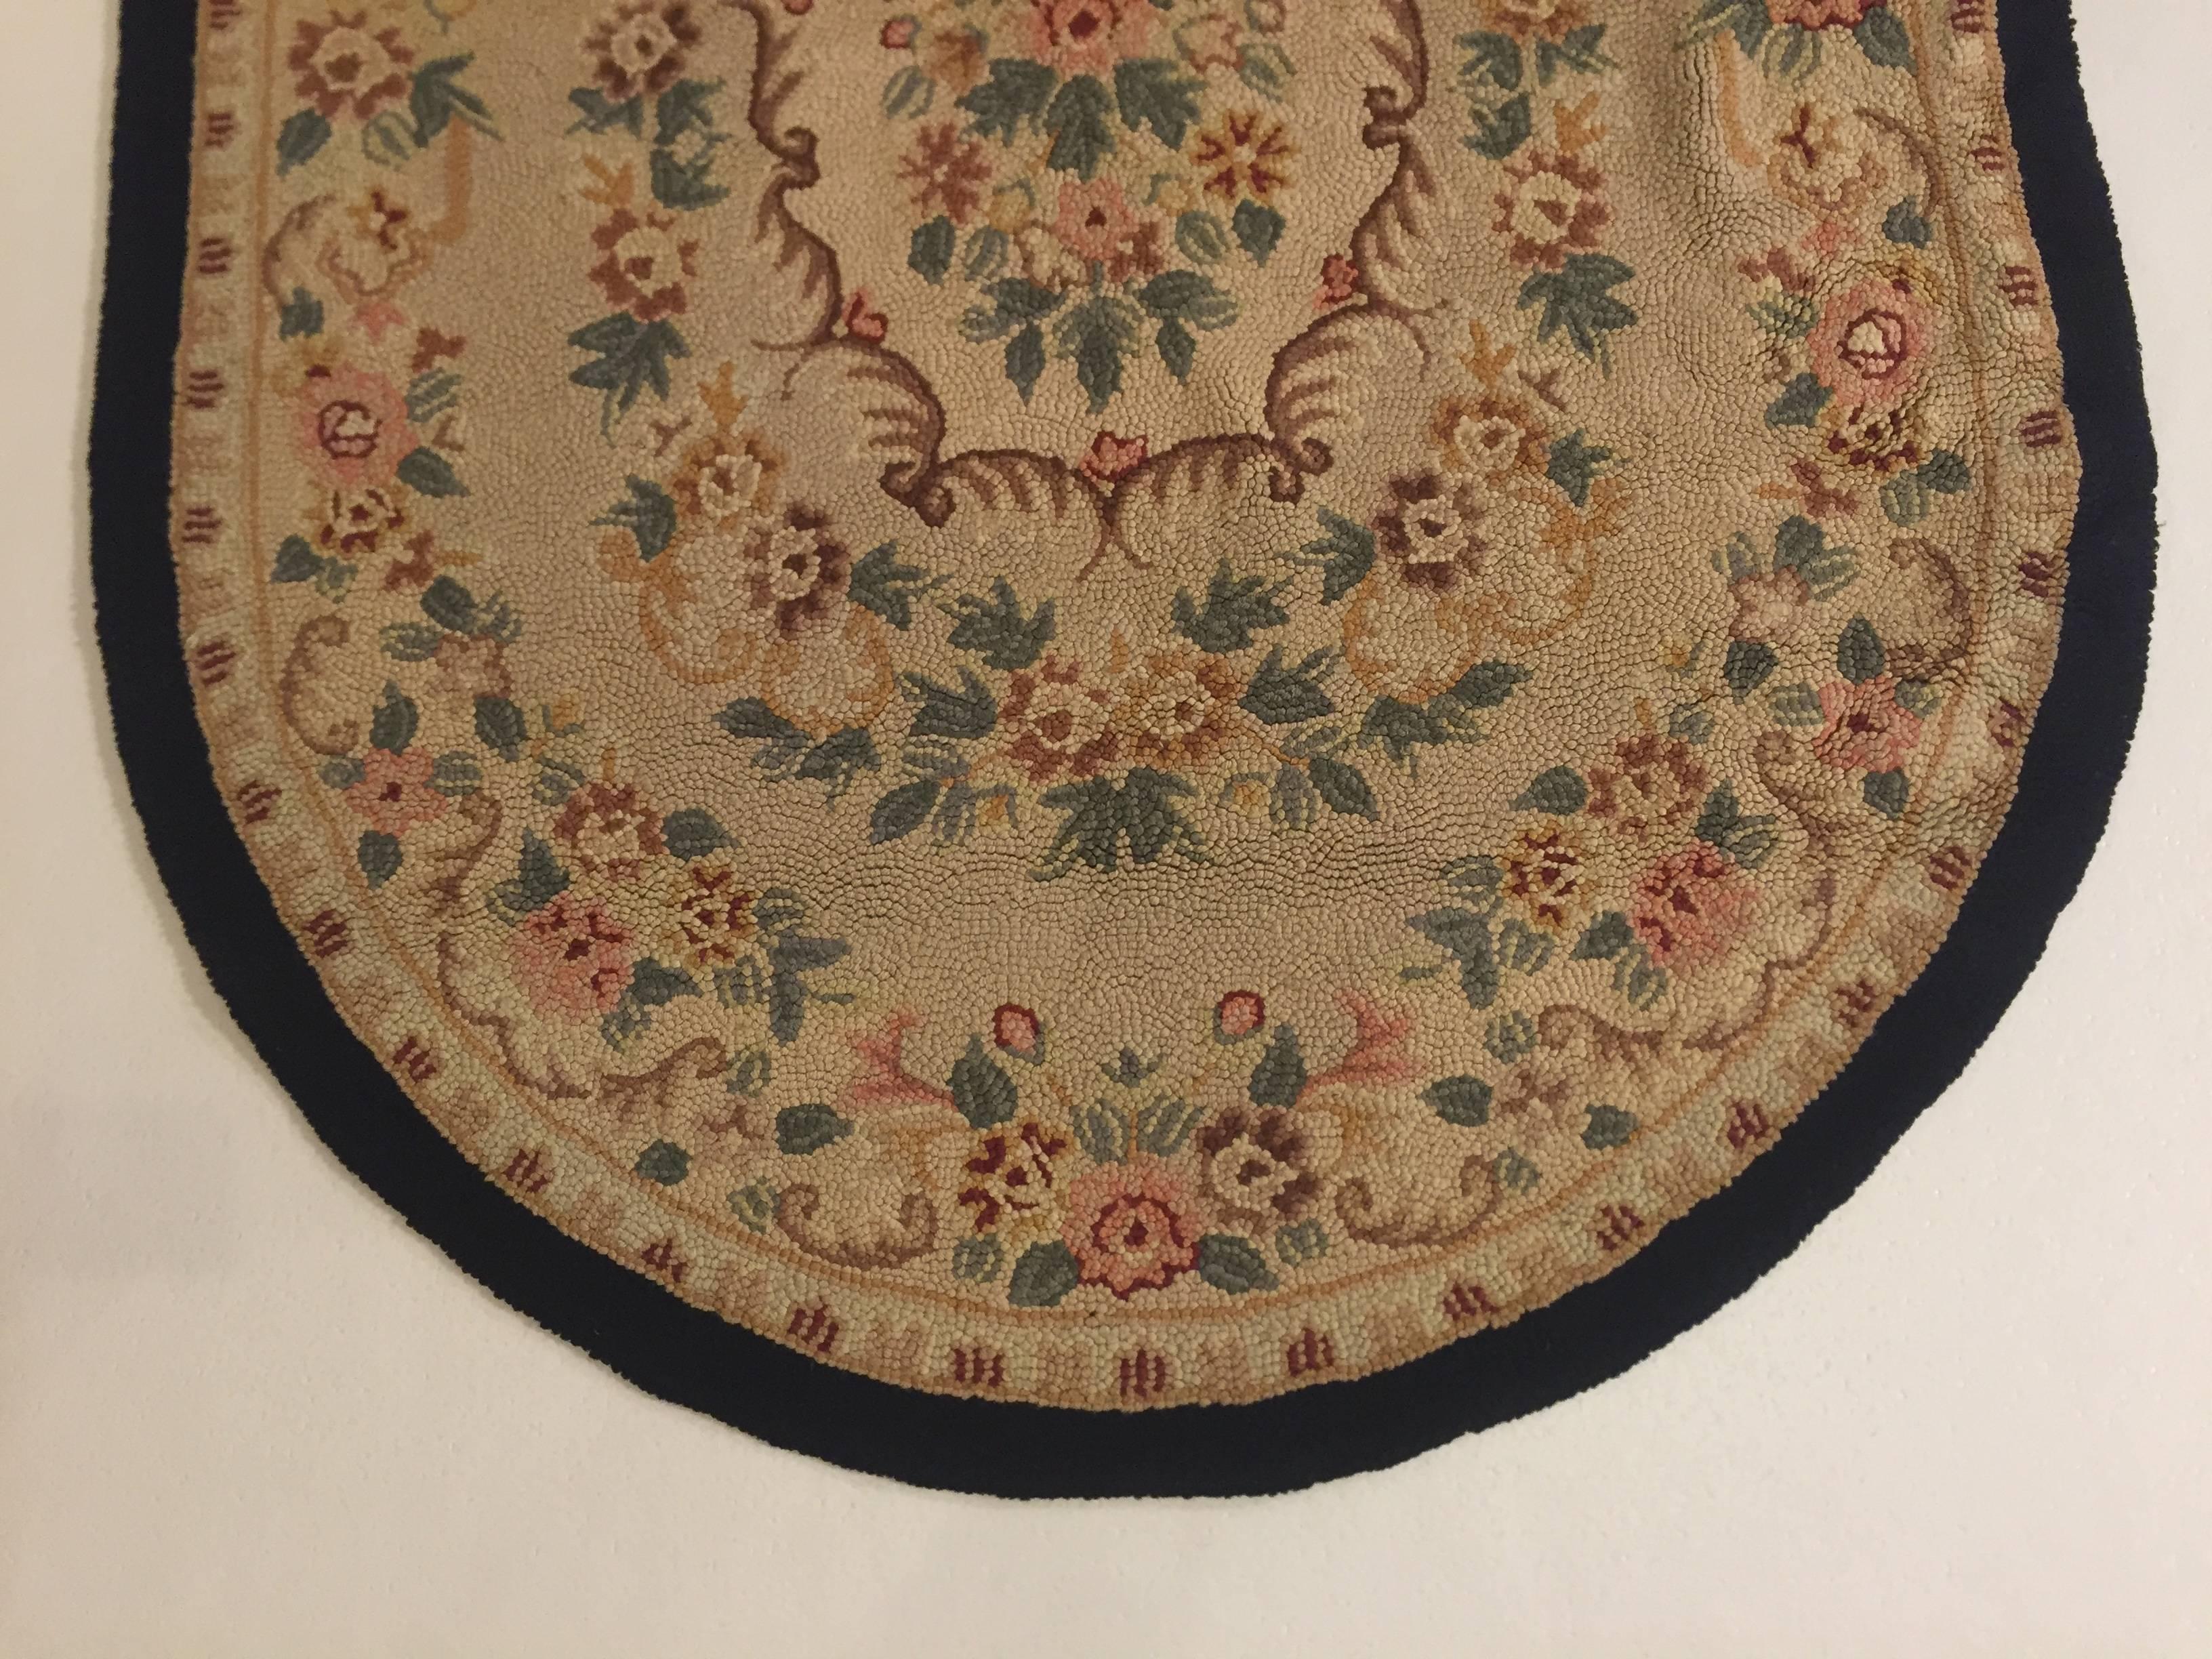 Crochet rug (Hooked rug) typical of North American craftsmanship of the early twentieth century. These rugs were produced at home by the wives of the American pioneers, who lived in isolated houses, far from the comforts of the big cities. They are